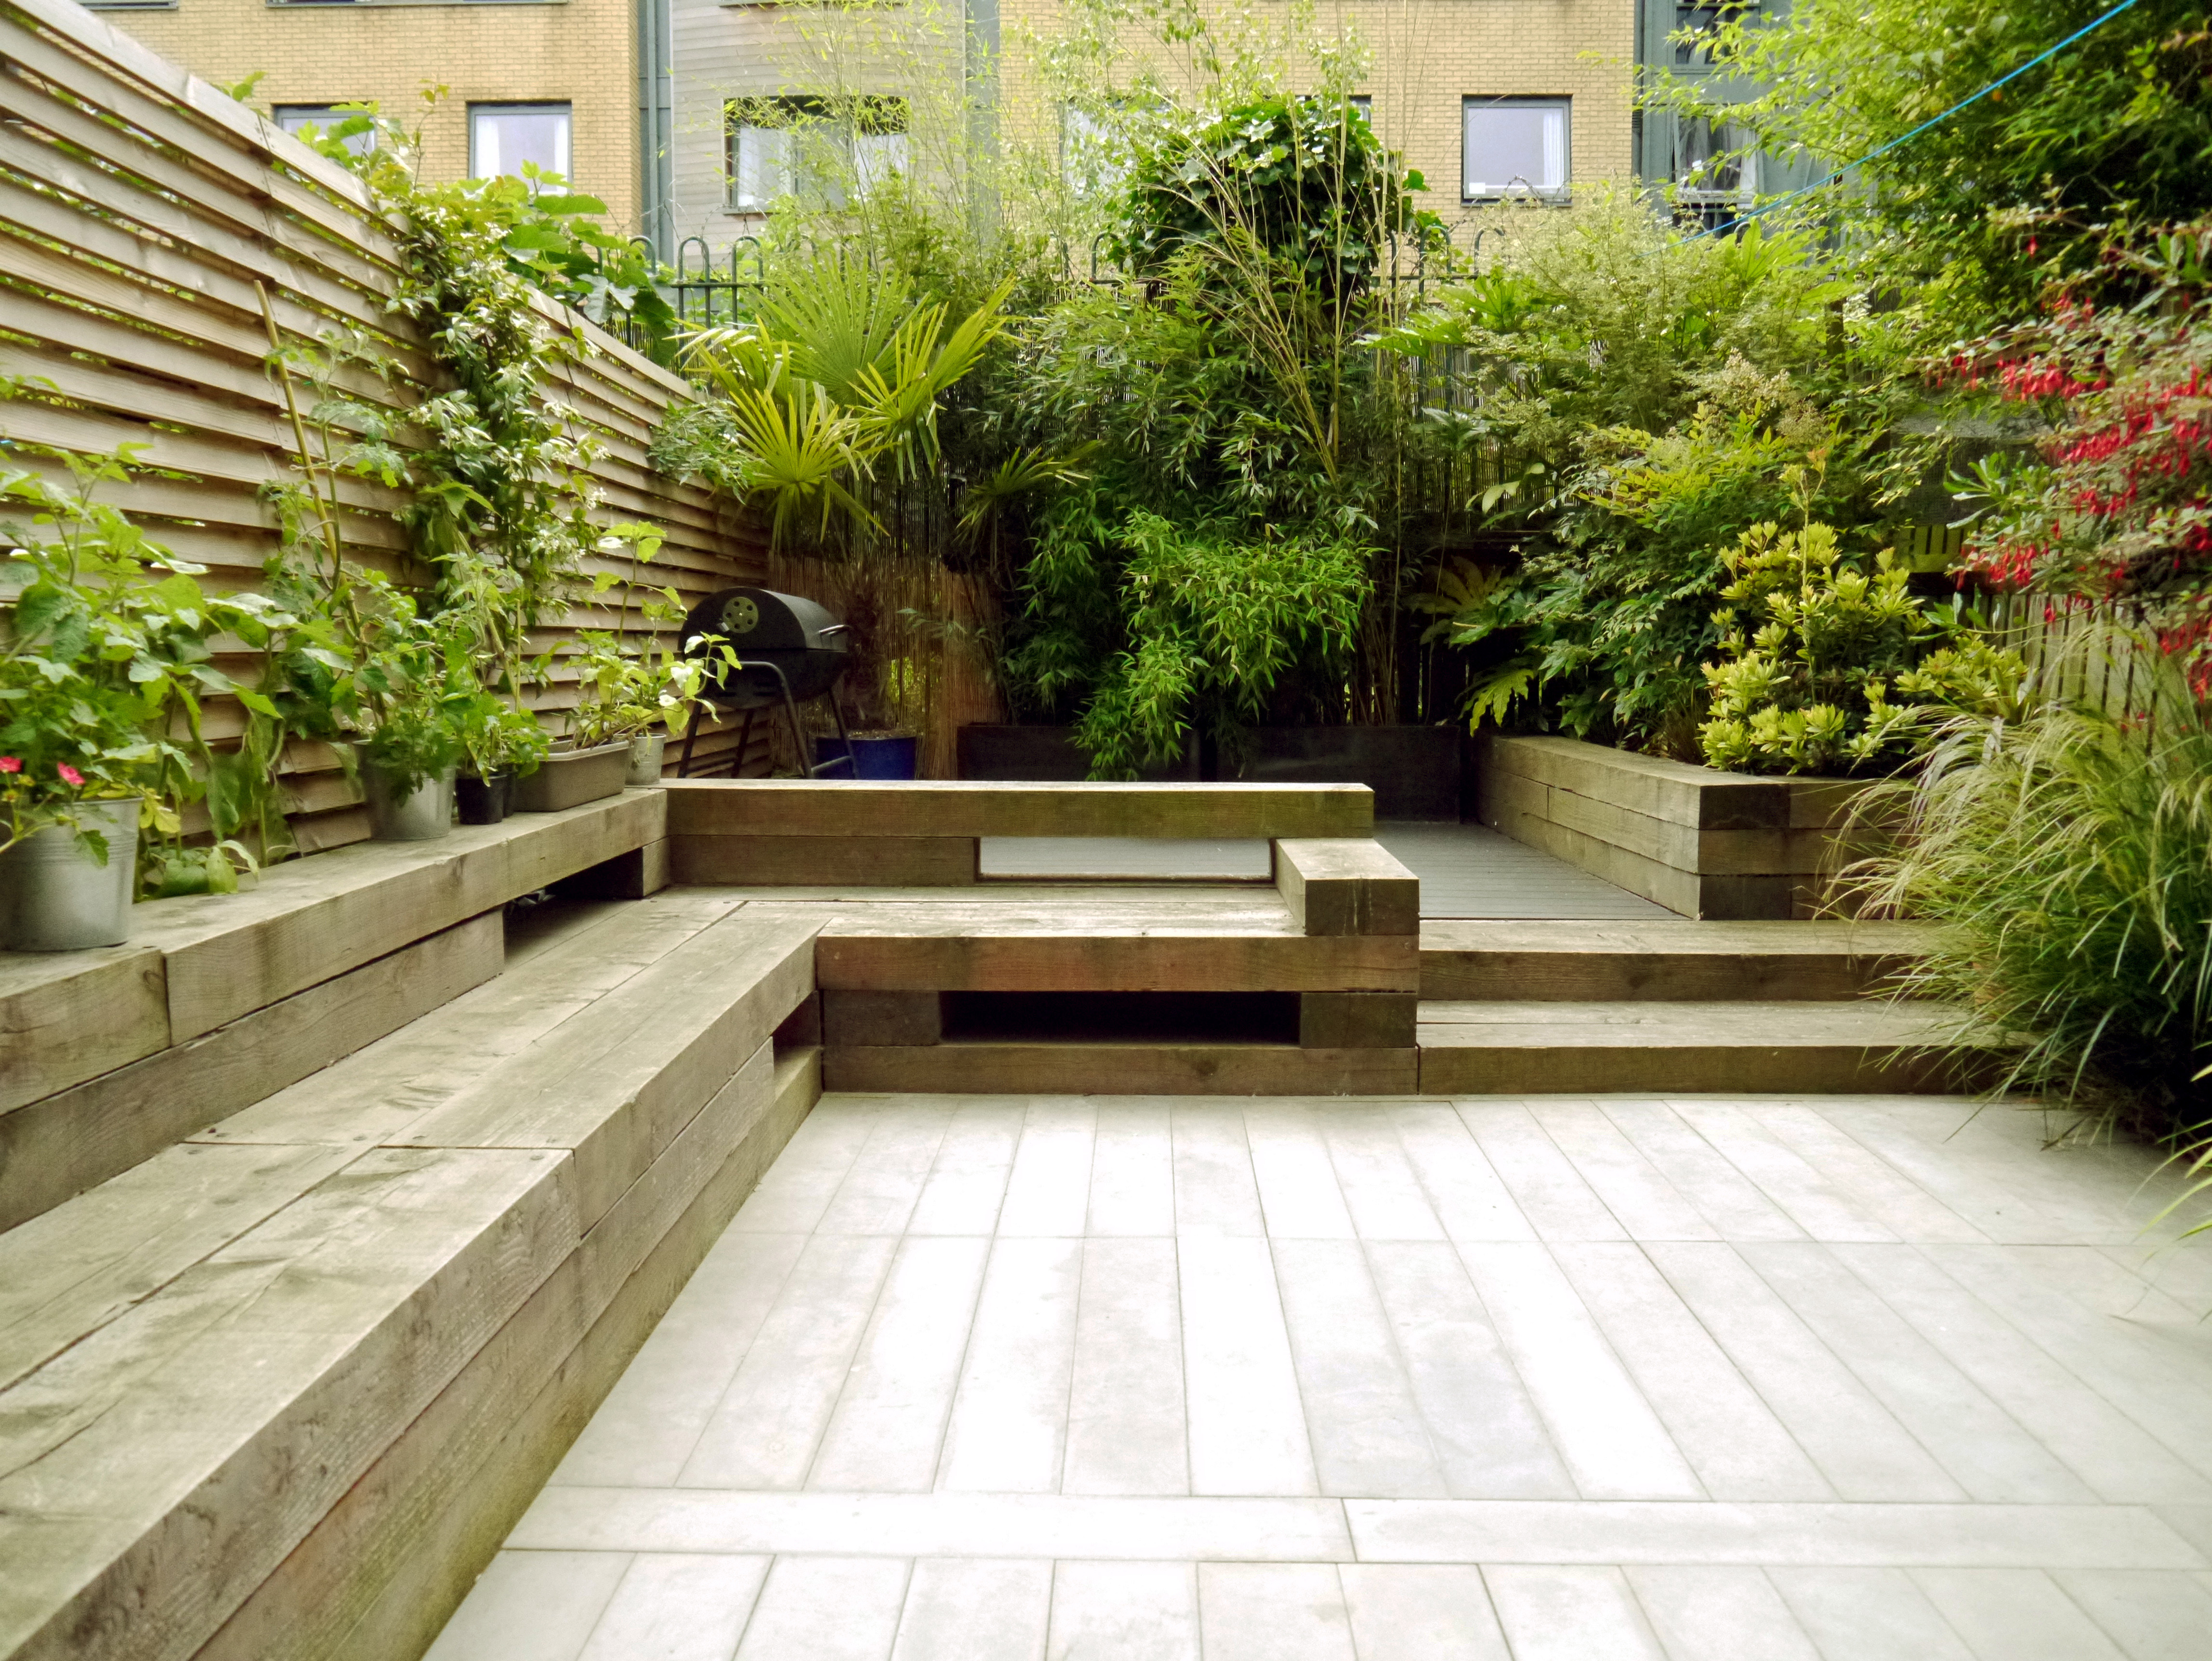 </p> <p>Find your ideal home design pro on designfor-me.com - get matched and see who's interested in your home project. Click image to see more inspiration from our design pros</p> <p>Design by Robert, architect from Islington, London</p> <p> #gardendesign #gardeninspiration #gardenlove #gardenideas #gardens </p> <p>